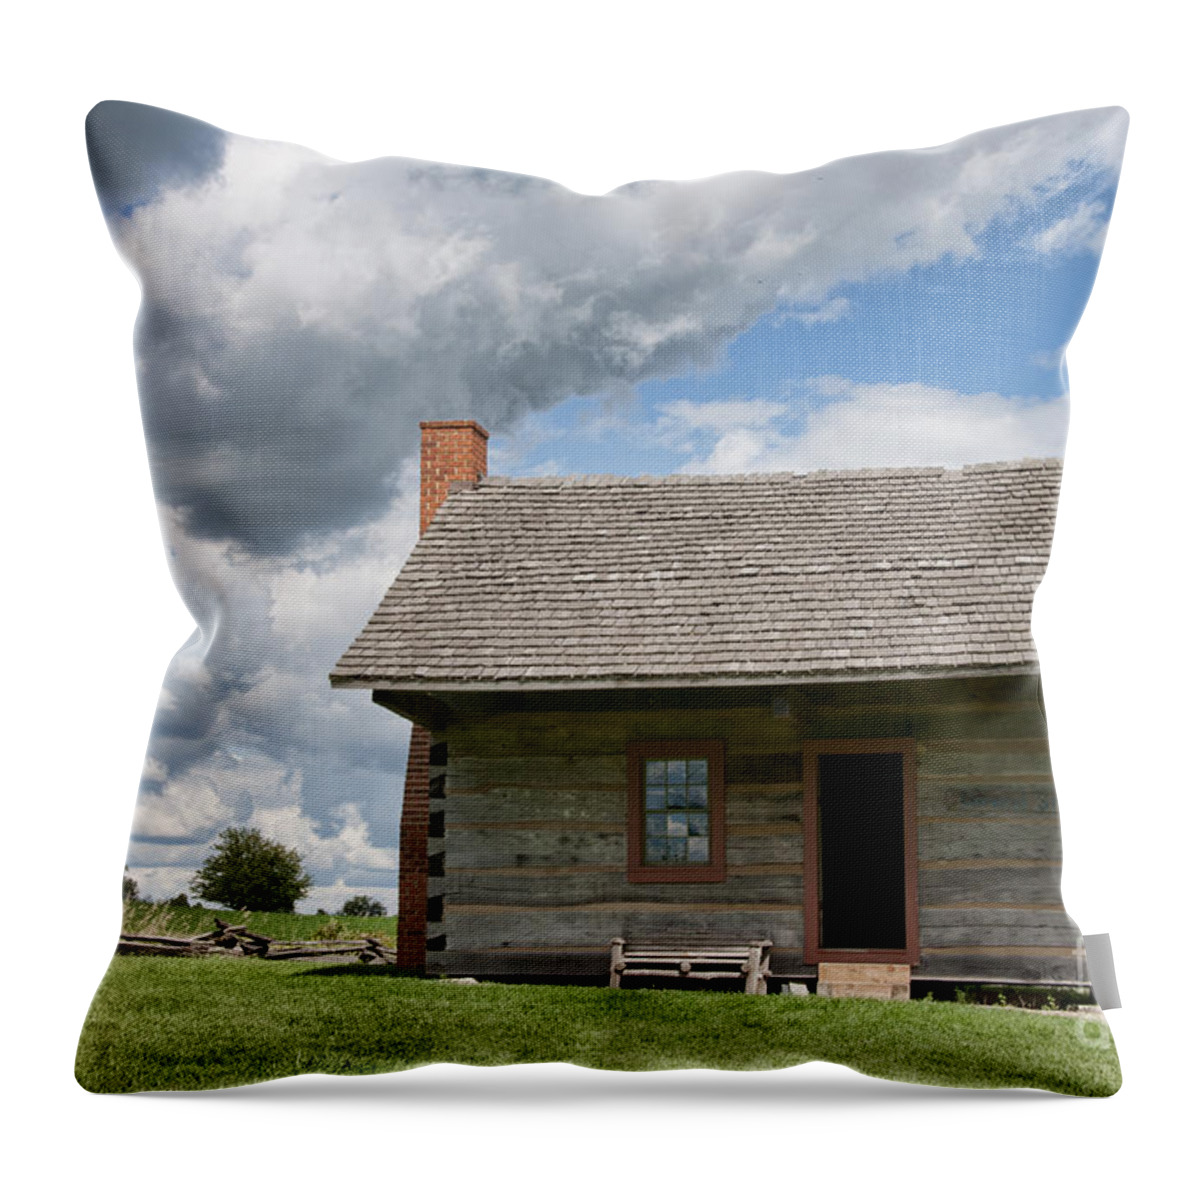 Log Cabin Throw Pillow featuring the photograph Log Cabin by David Arment